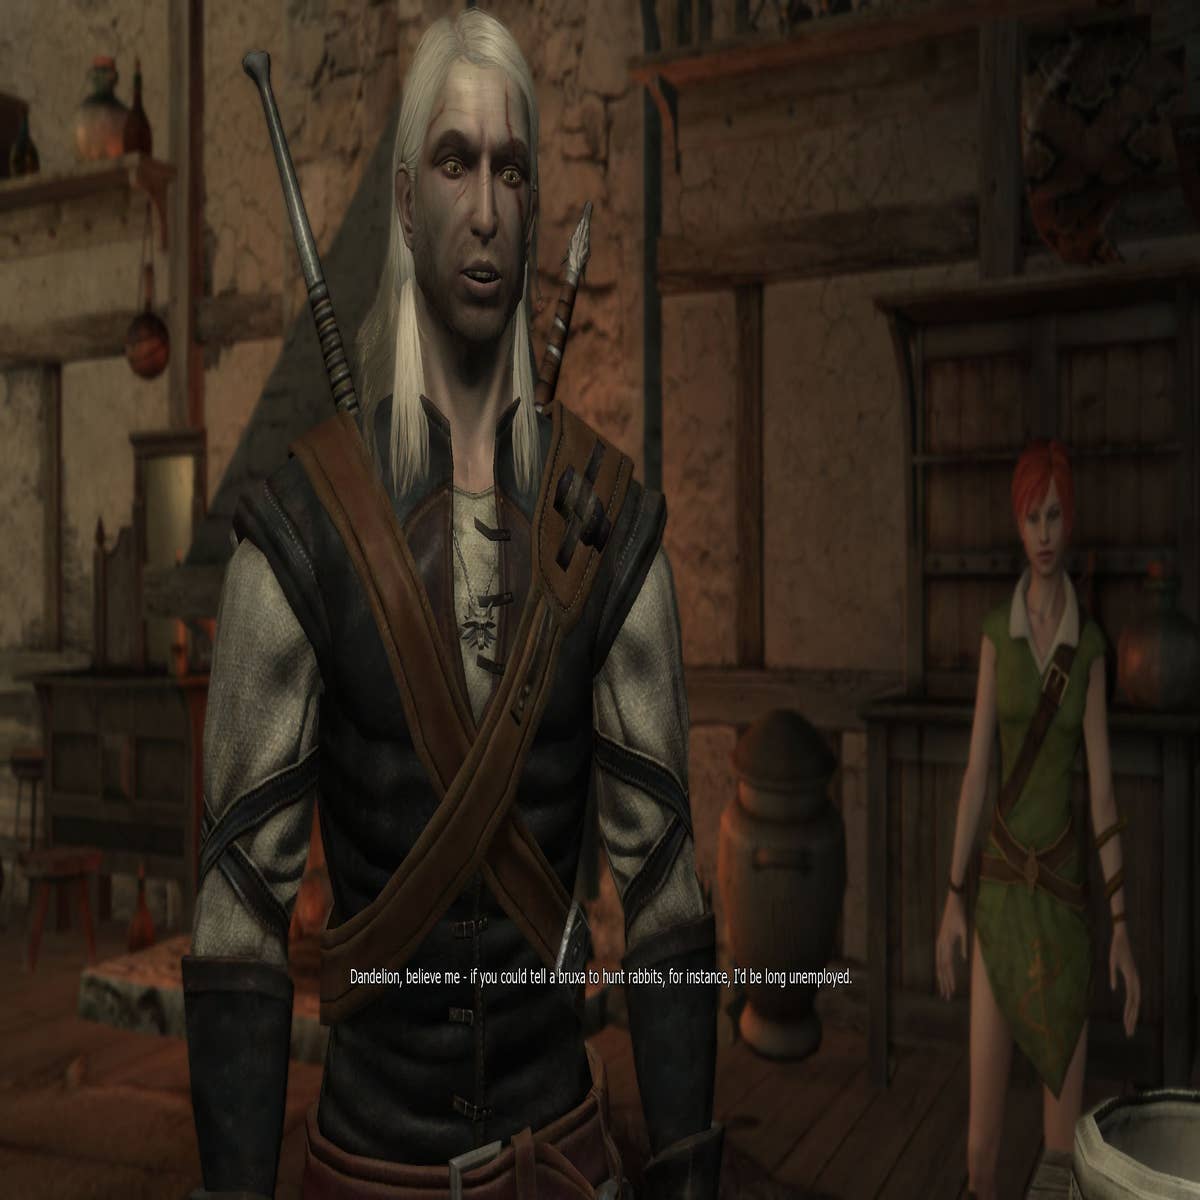 Will we get remasters of The Witcher 1 & 2? Probably not - The